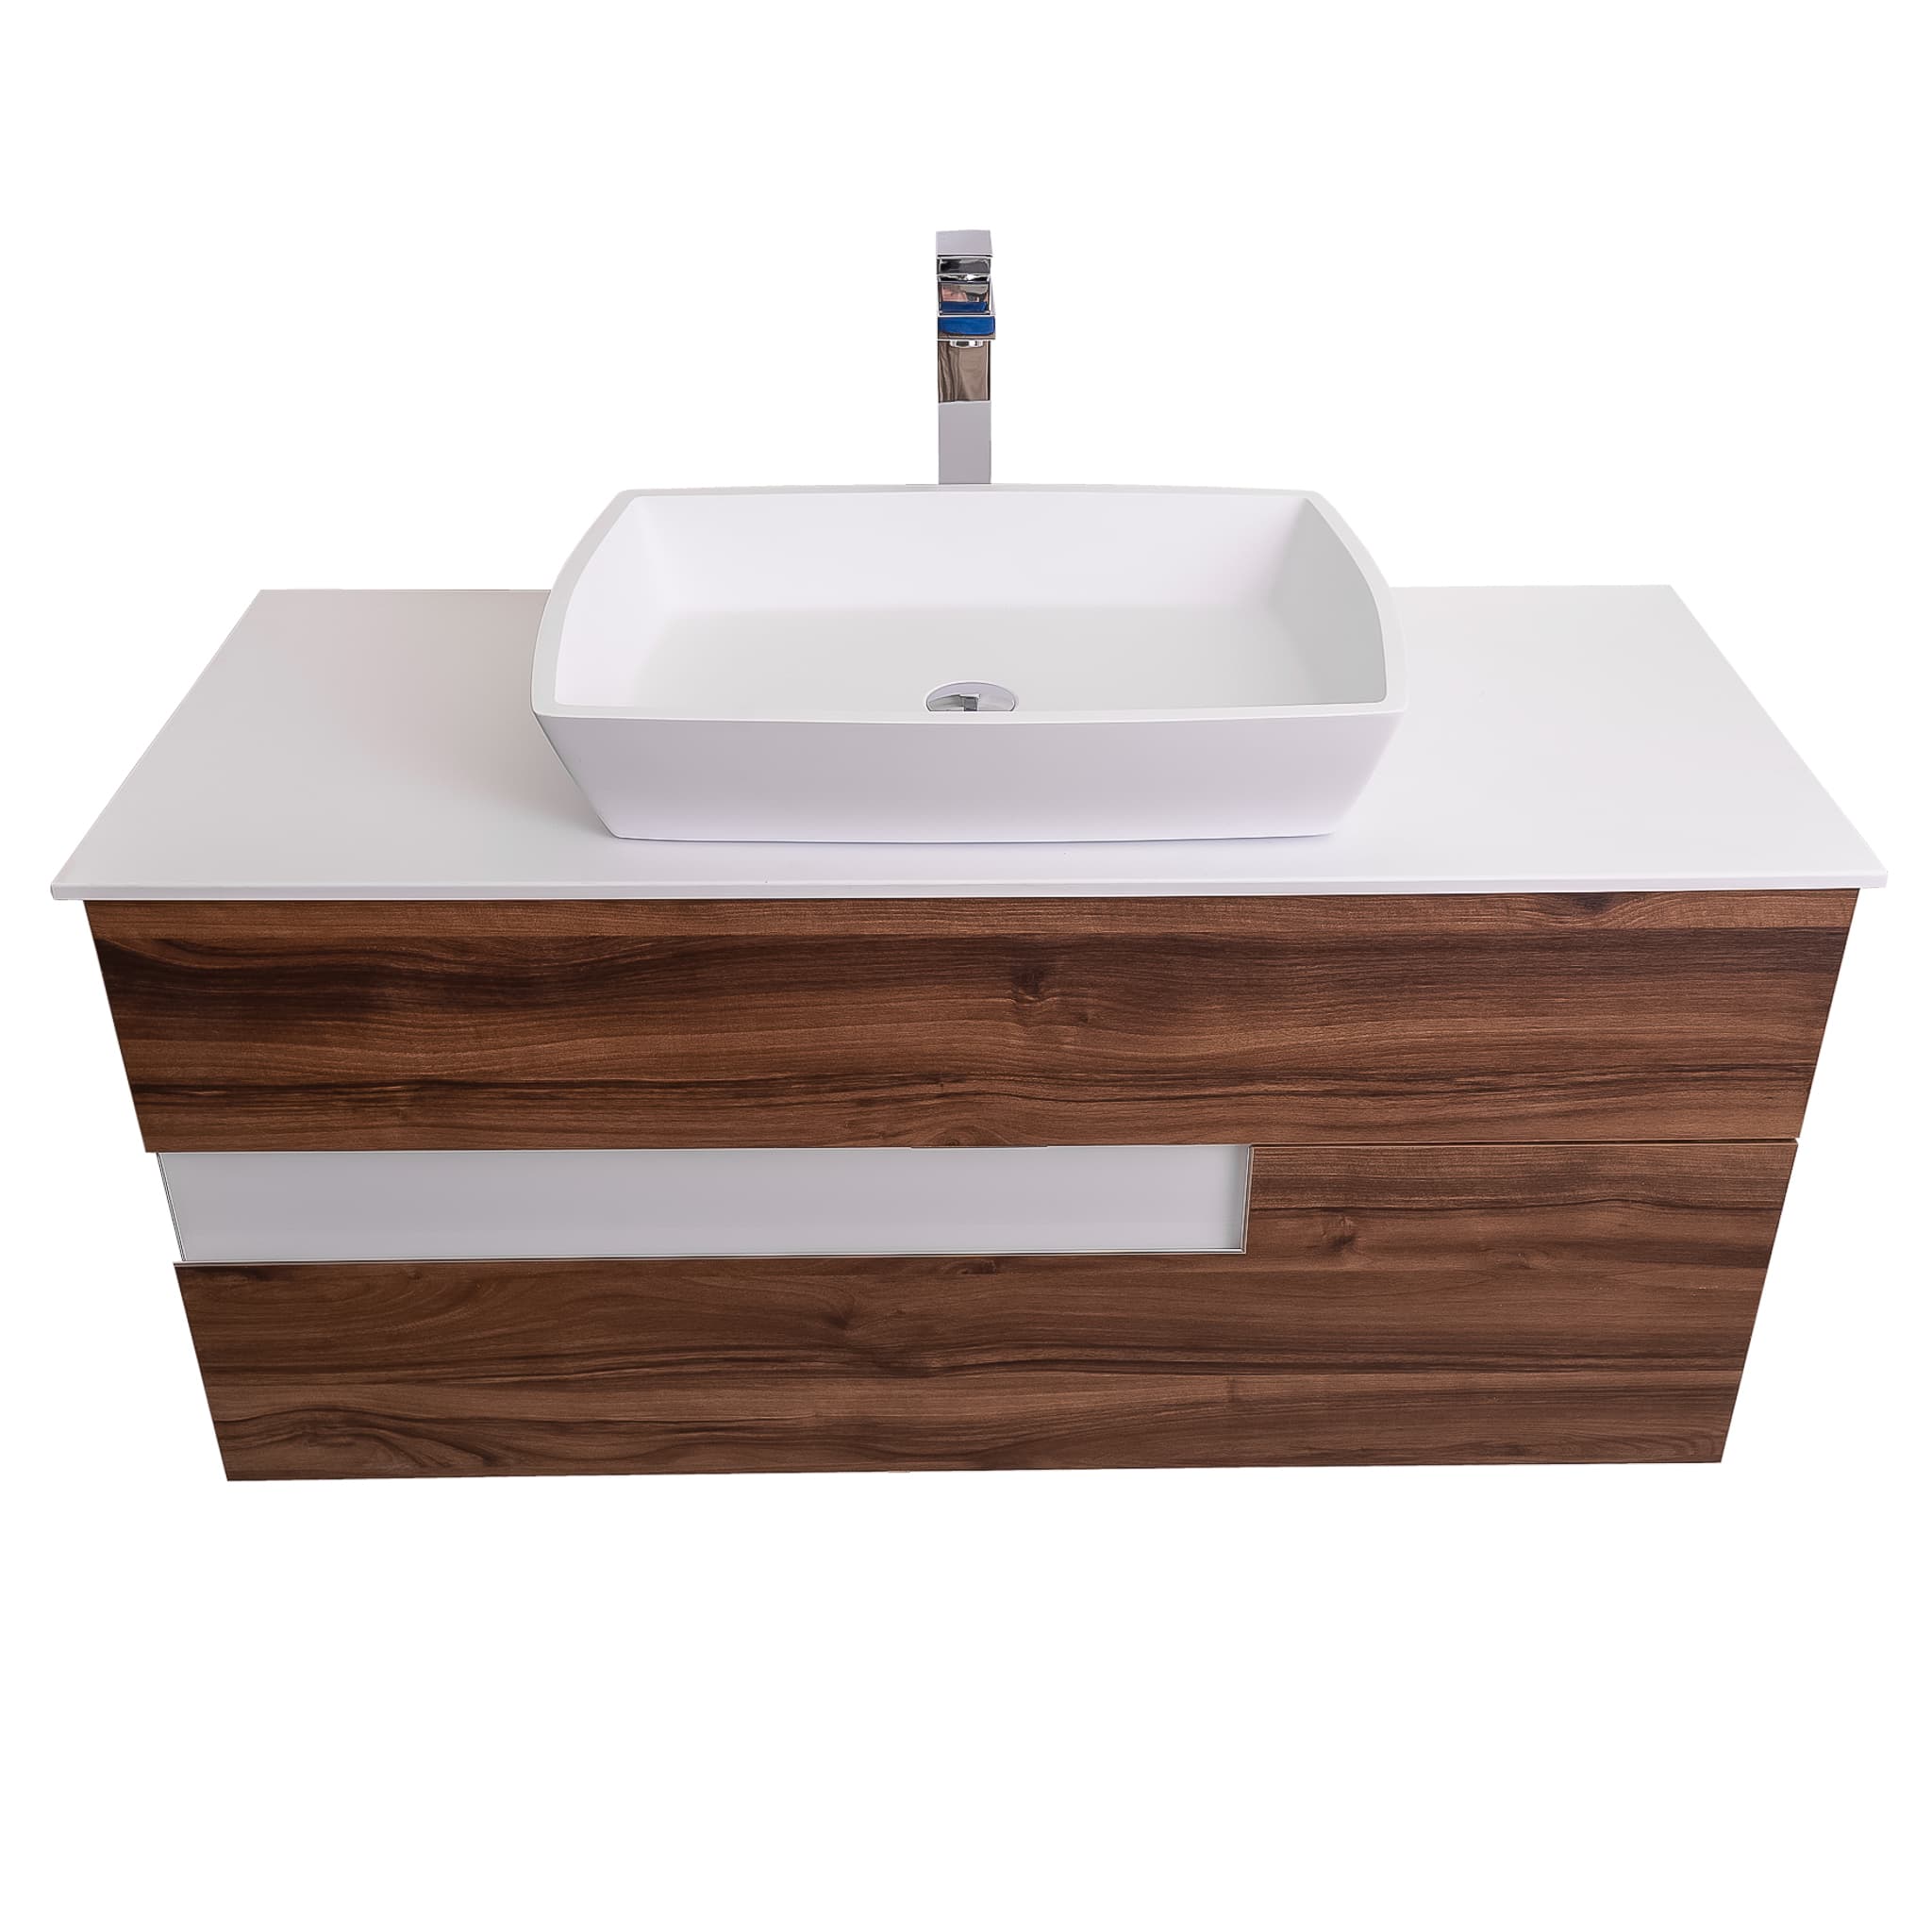 Vision 47.5 Valenti Medium Brown Wood Cabinet, Solid Surface Flat White Counter And Square Solid Surface White Basin 1316, Wall Mounted Modern Vanity Set